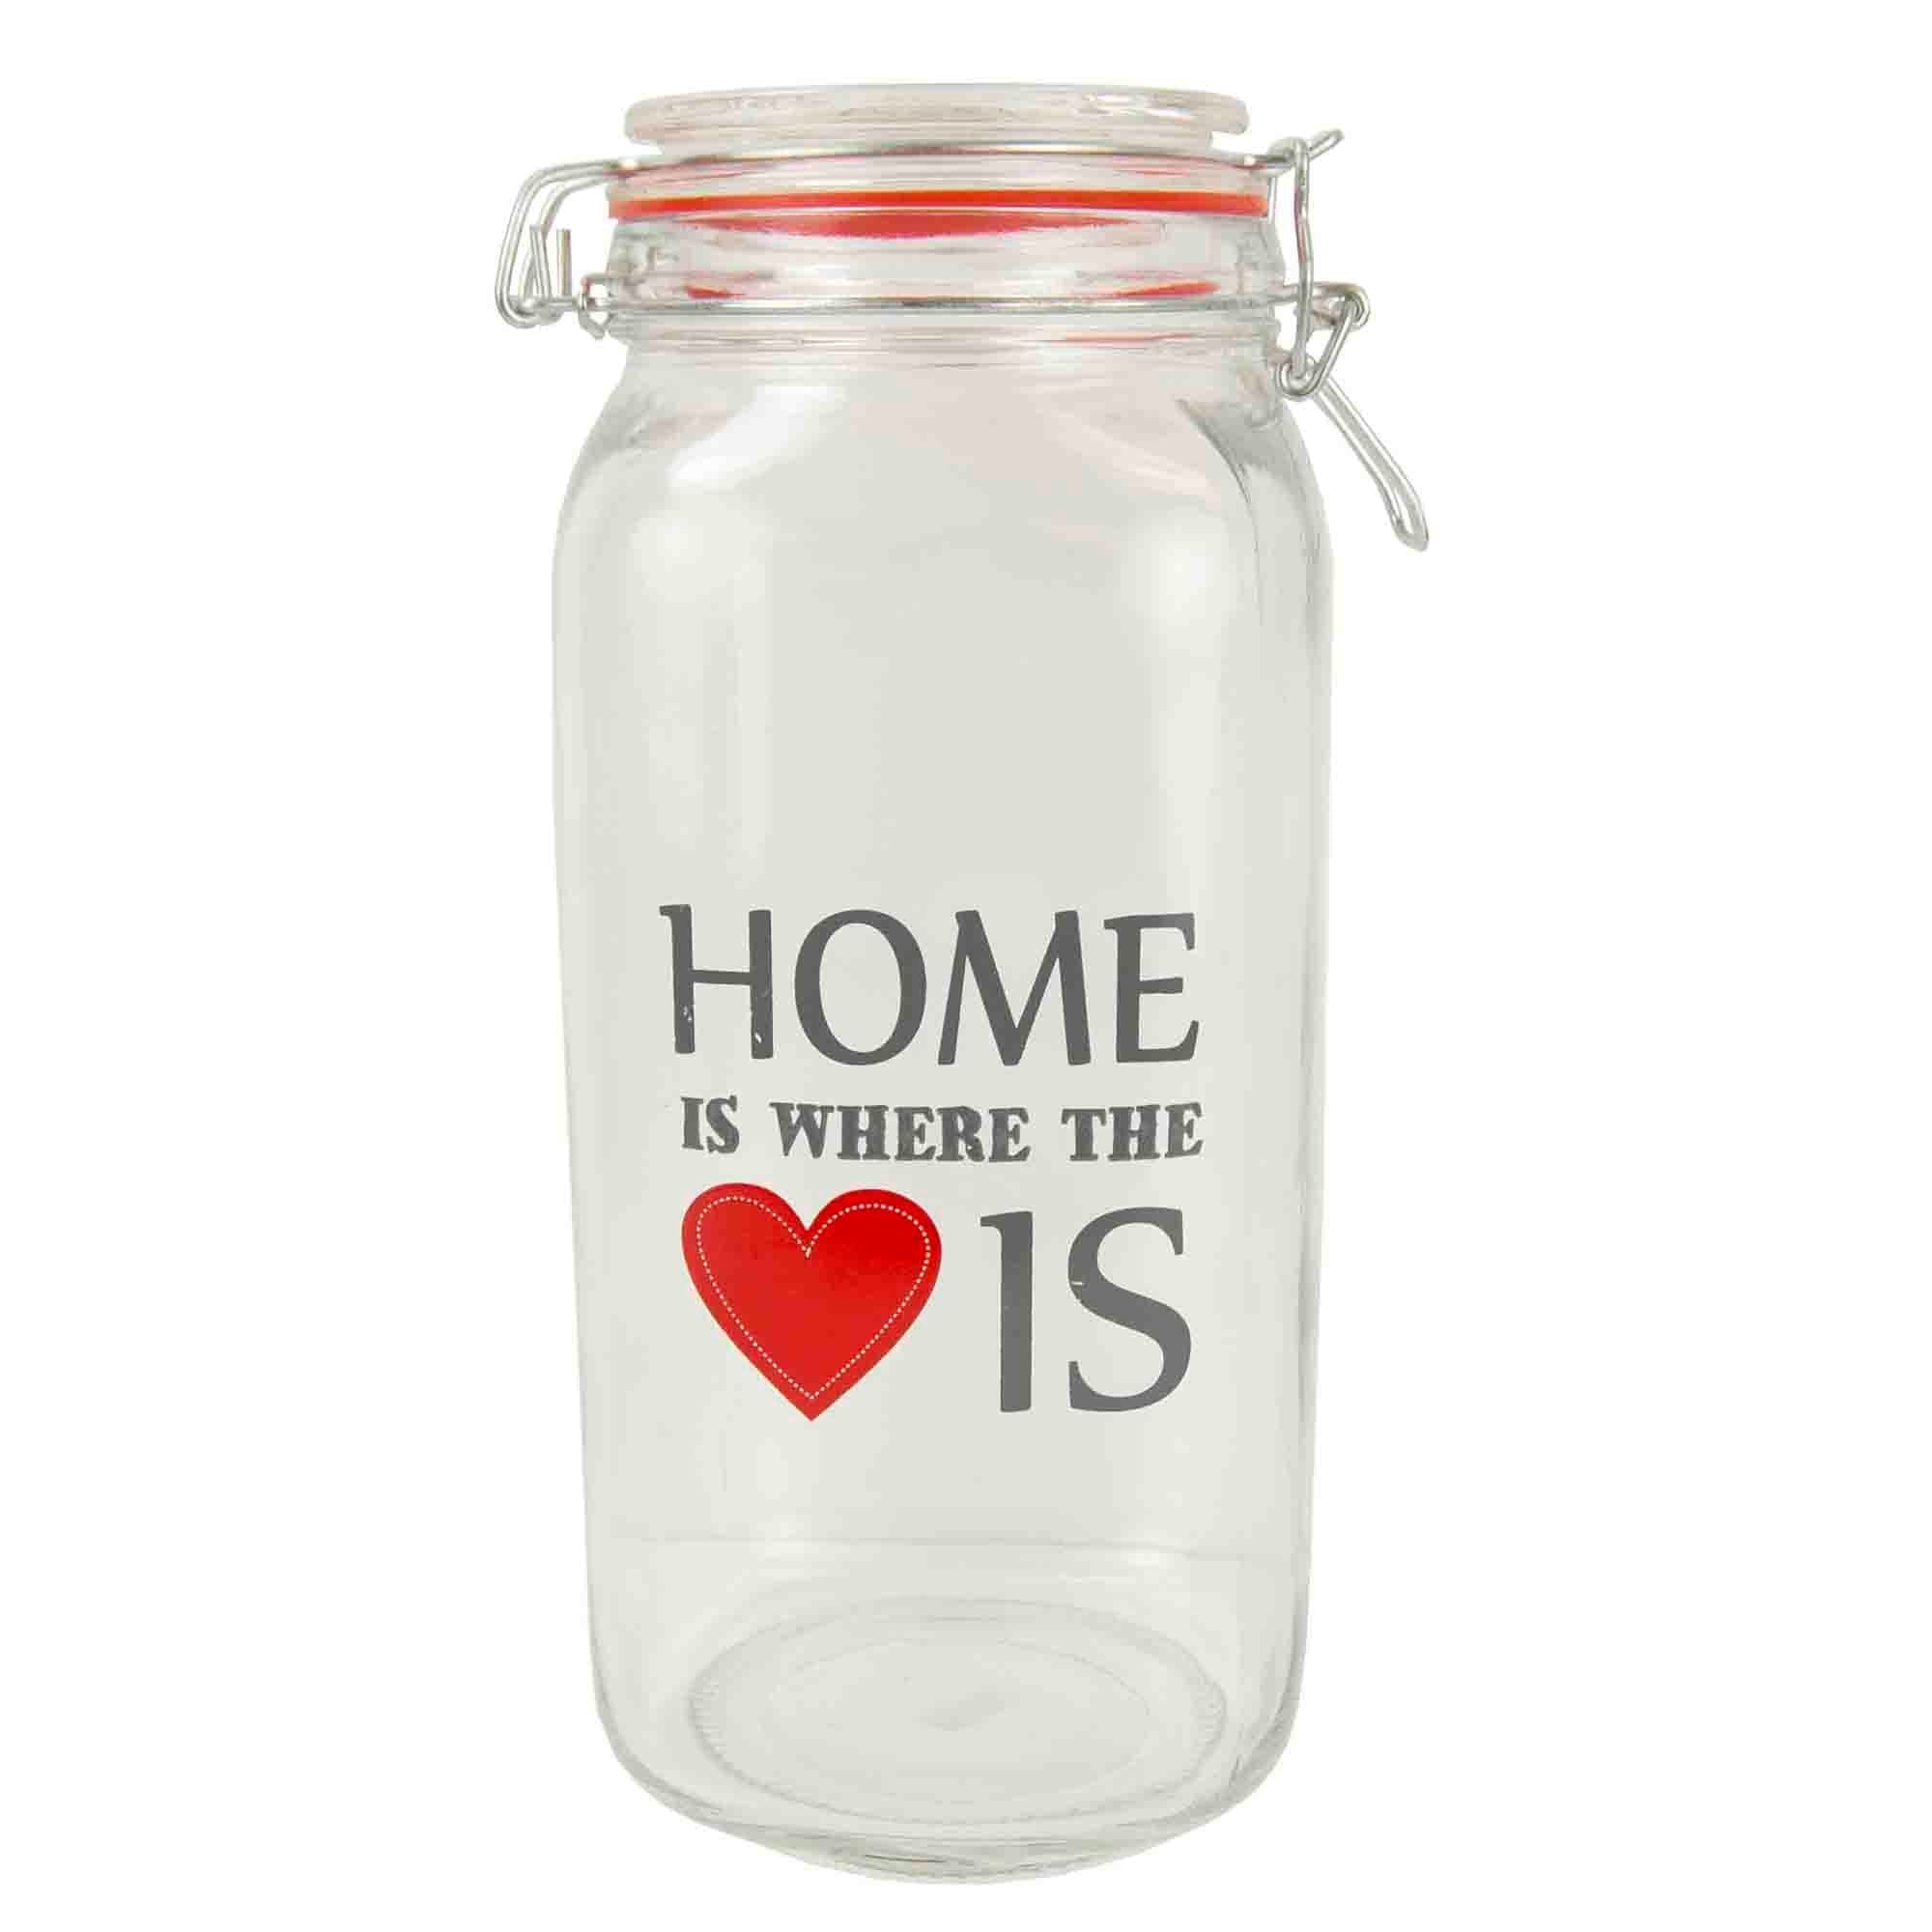 Home Basics Home is Where the Heart Is 68 oz. Glass Jar $3.5 EACH, CASE PACK OF 12